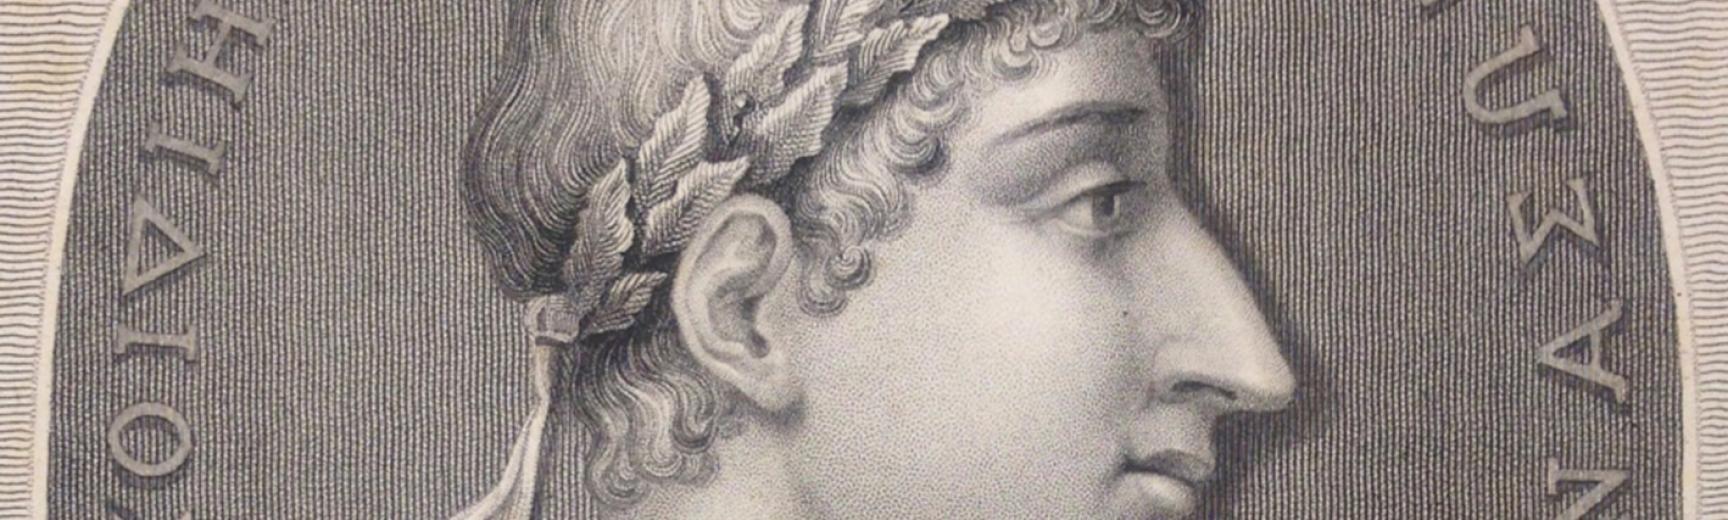 Ovid, from the Variorum Classics edition, engraved by Robert Cooper